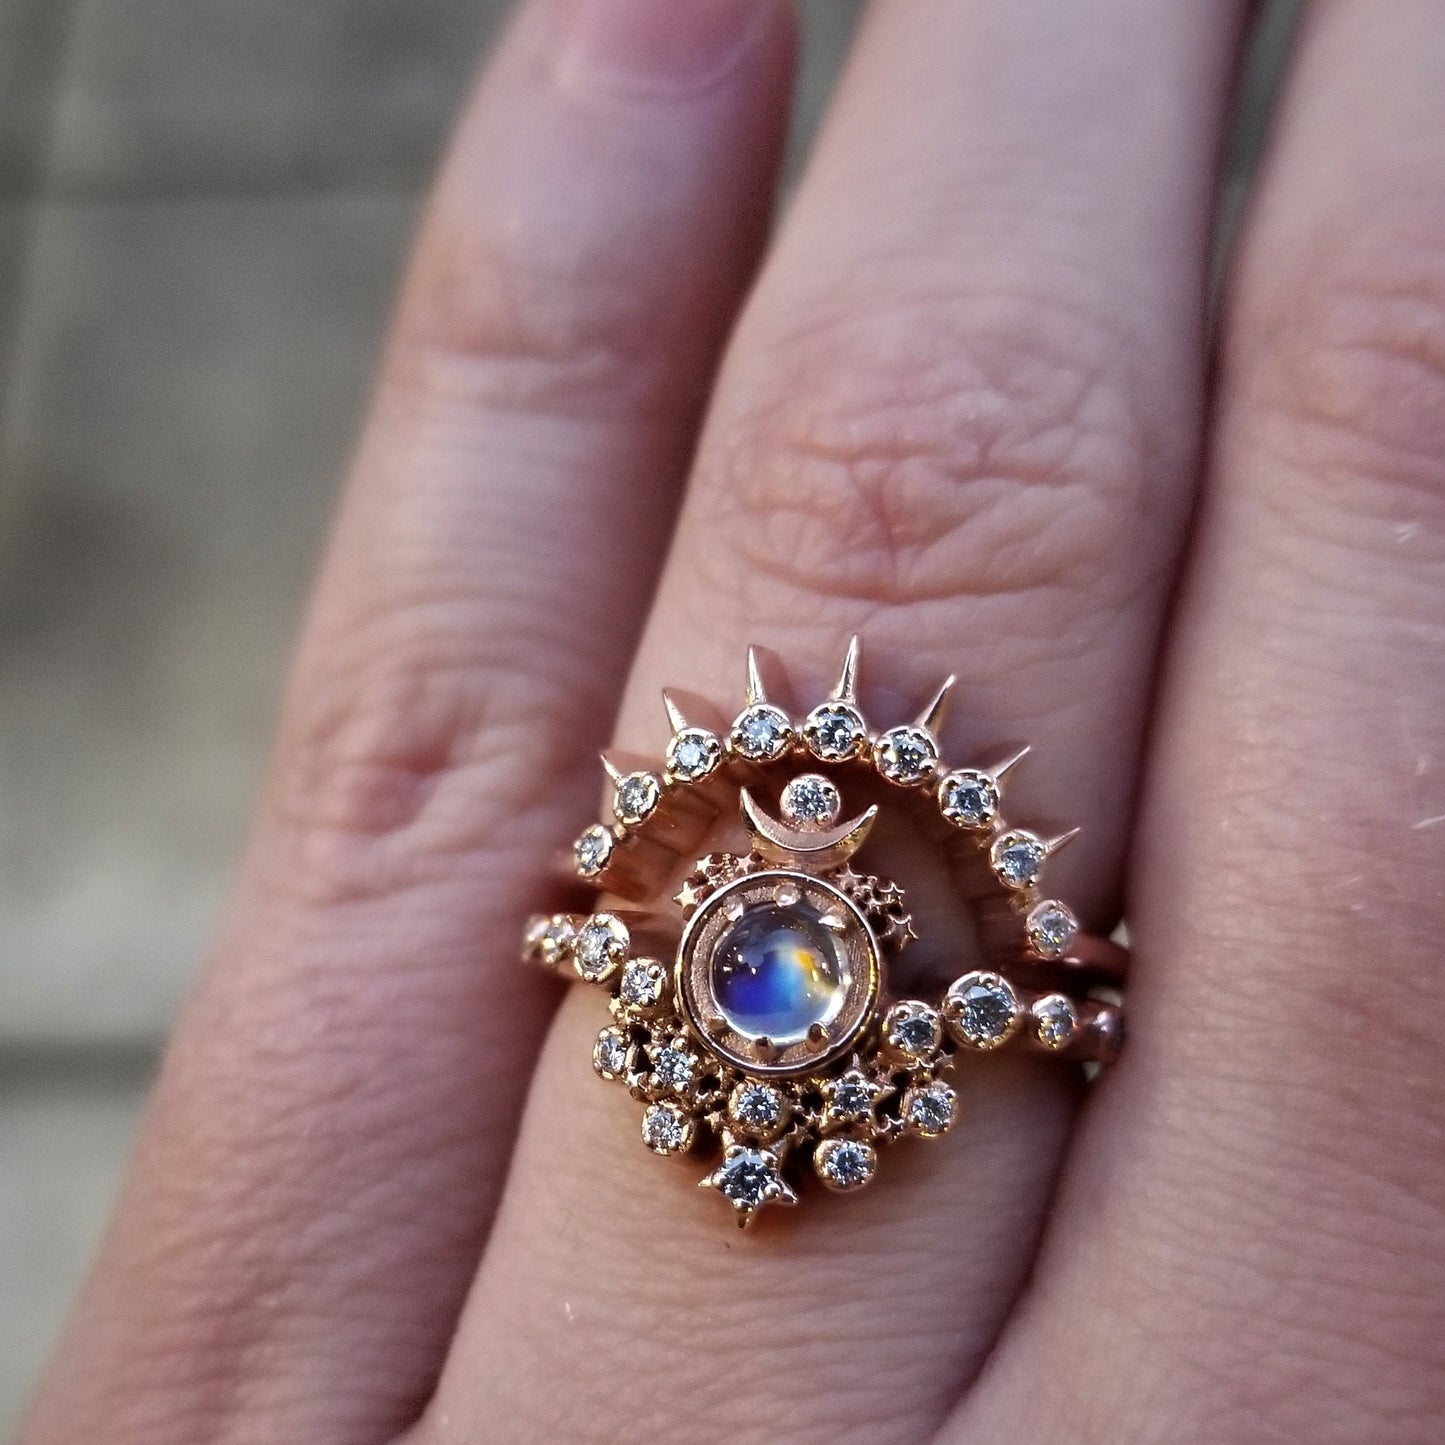 Gold Moon Witch Engagement Ring Set - Rainbow Moonstone and Diamonds with Sunray Diamond Wedding Band Modern Fine Jewelry